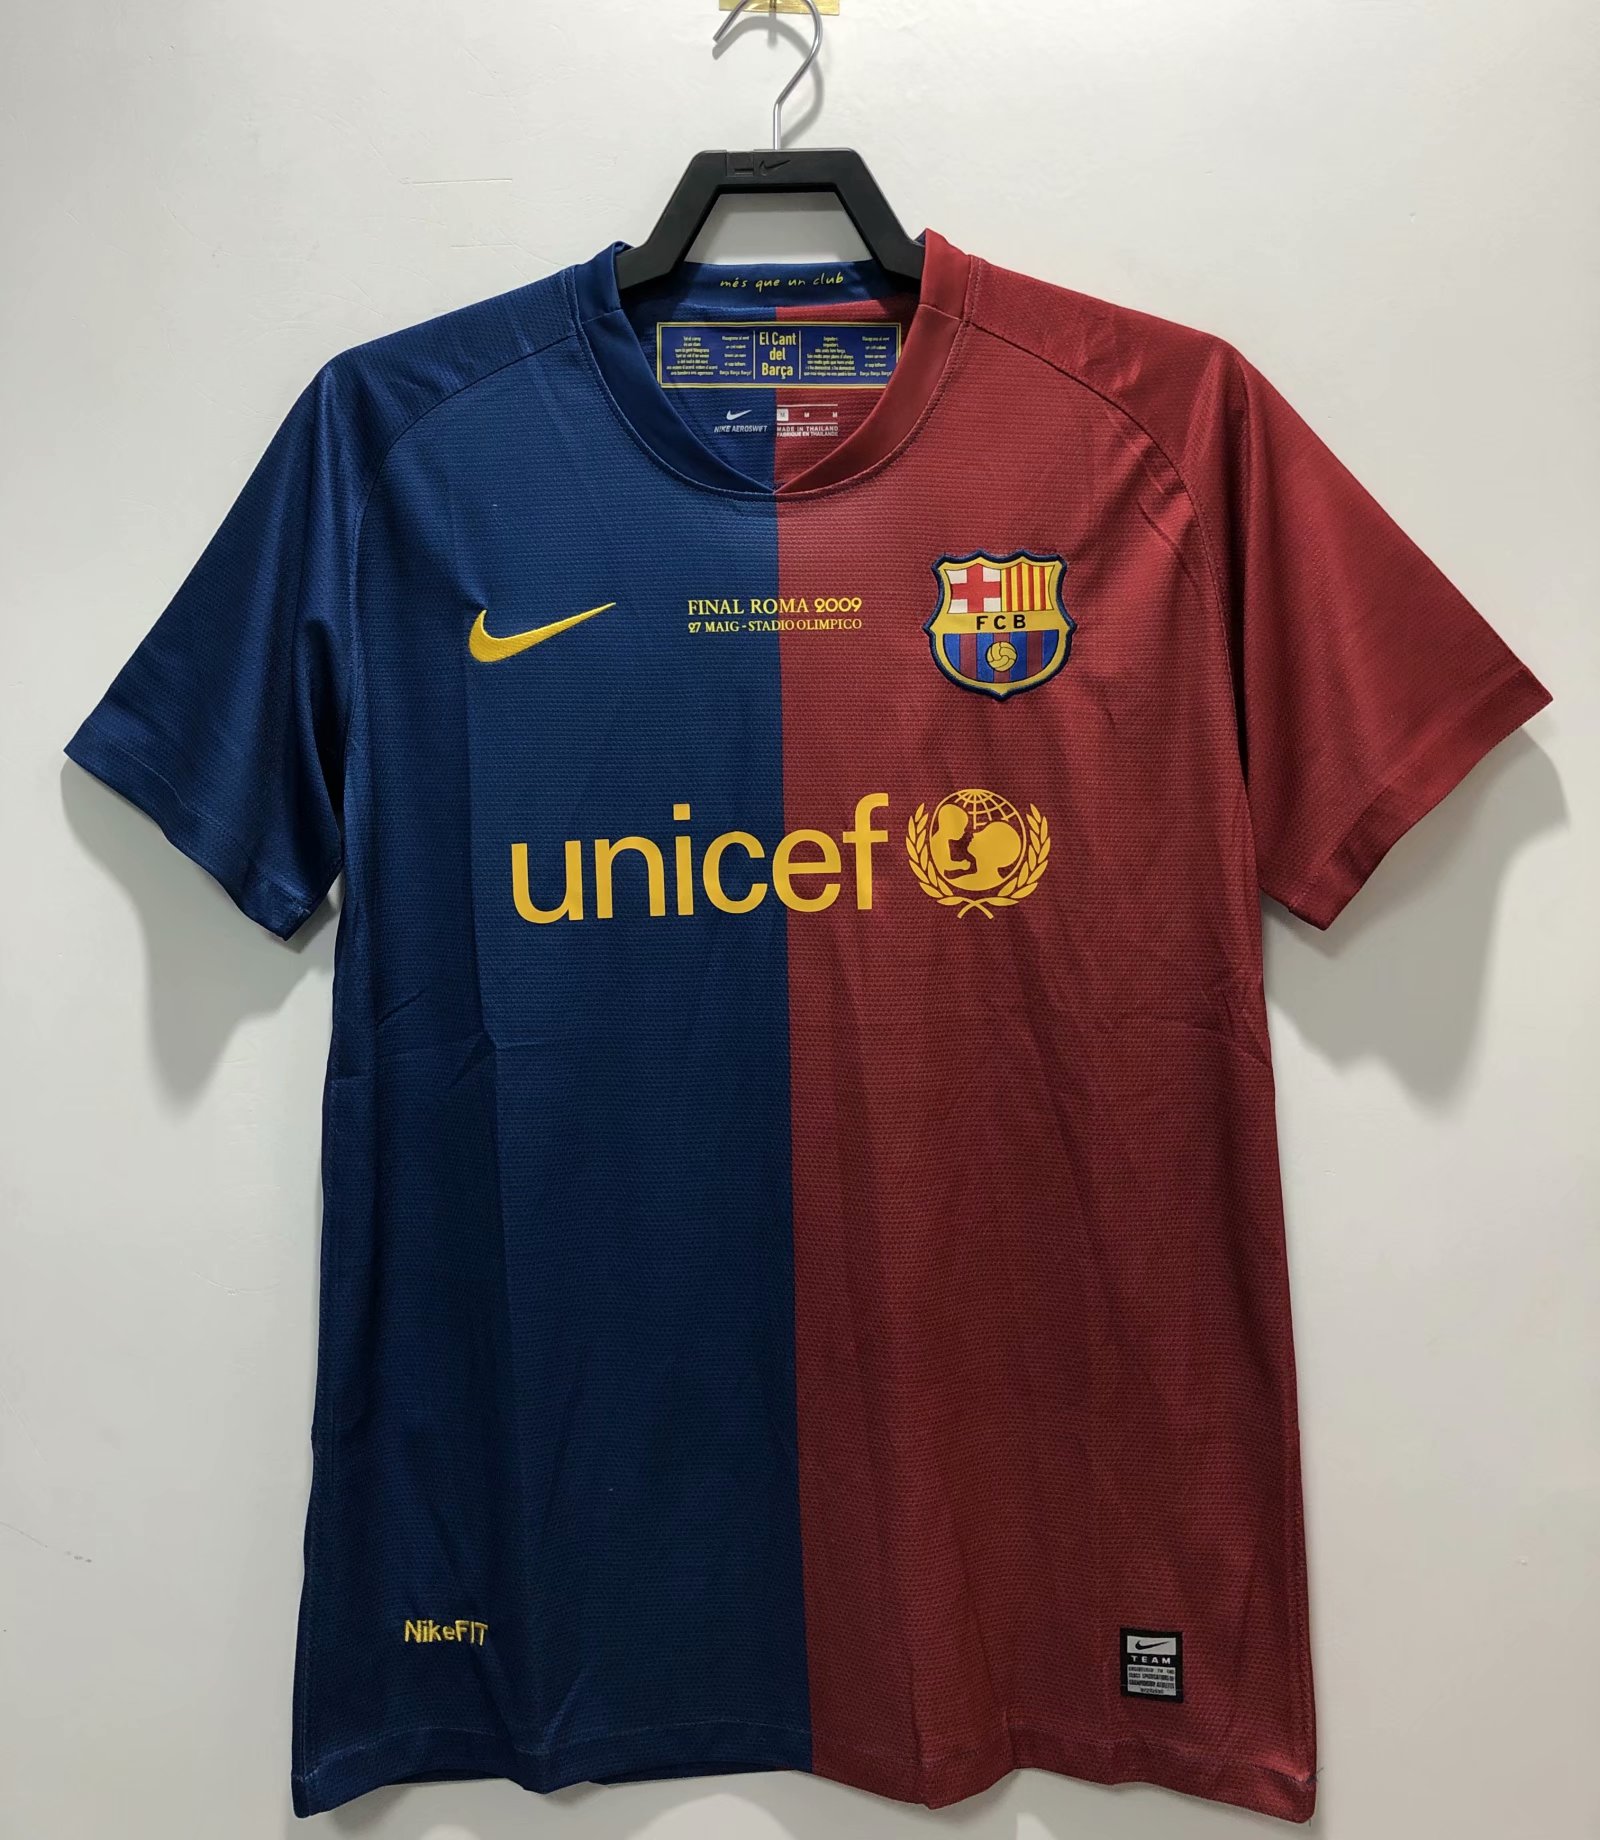 UEFA Champions League 08-09 Retro Version Barcelona Home Red & Blue Thailand Soccer Jersey AAA-311